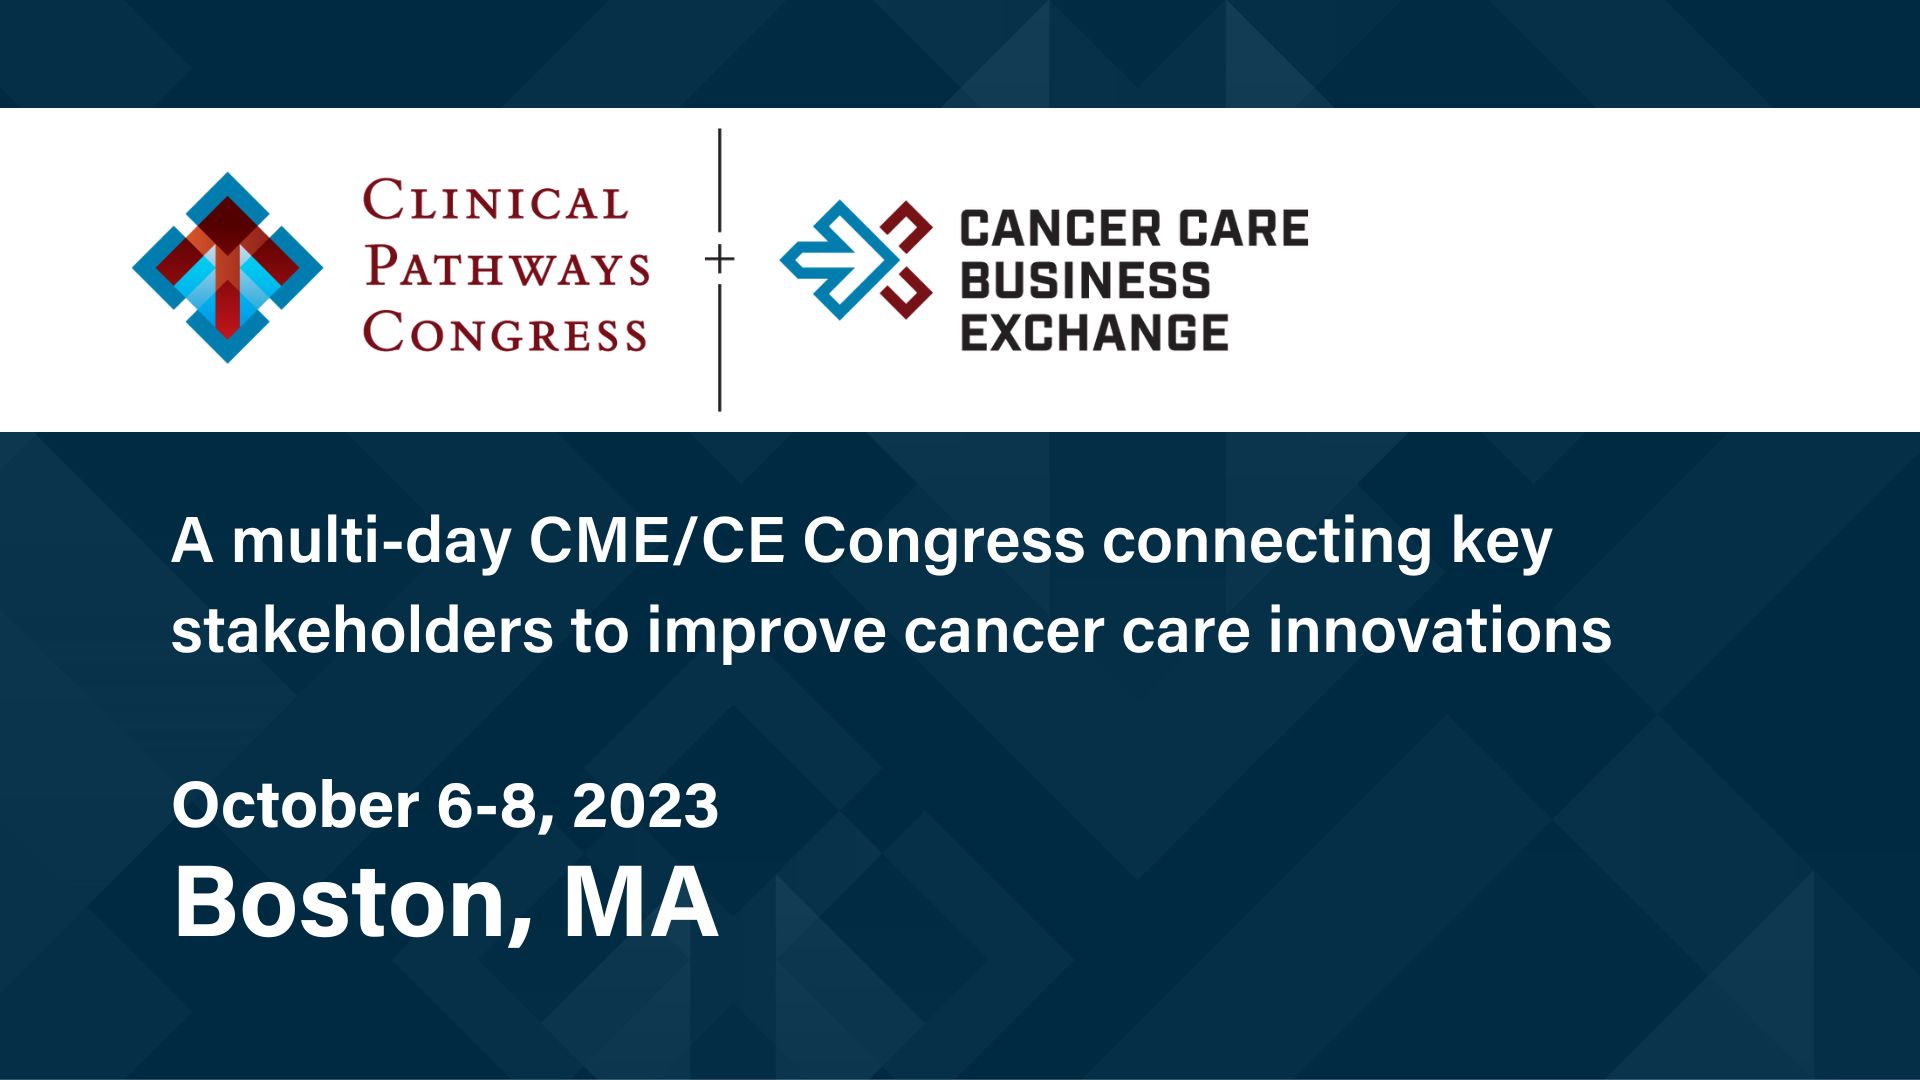 Clinical Pathways Congress + Cancer Care Business Exchange